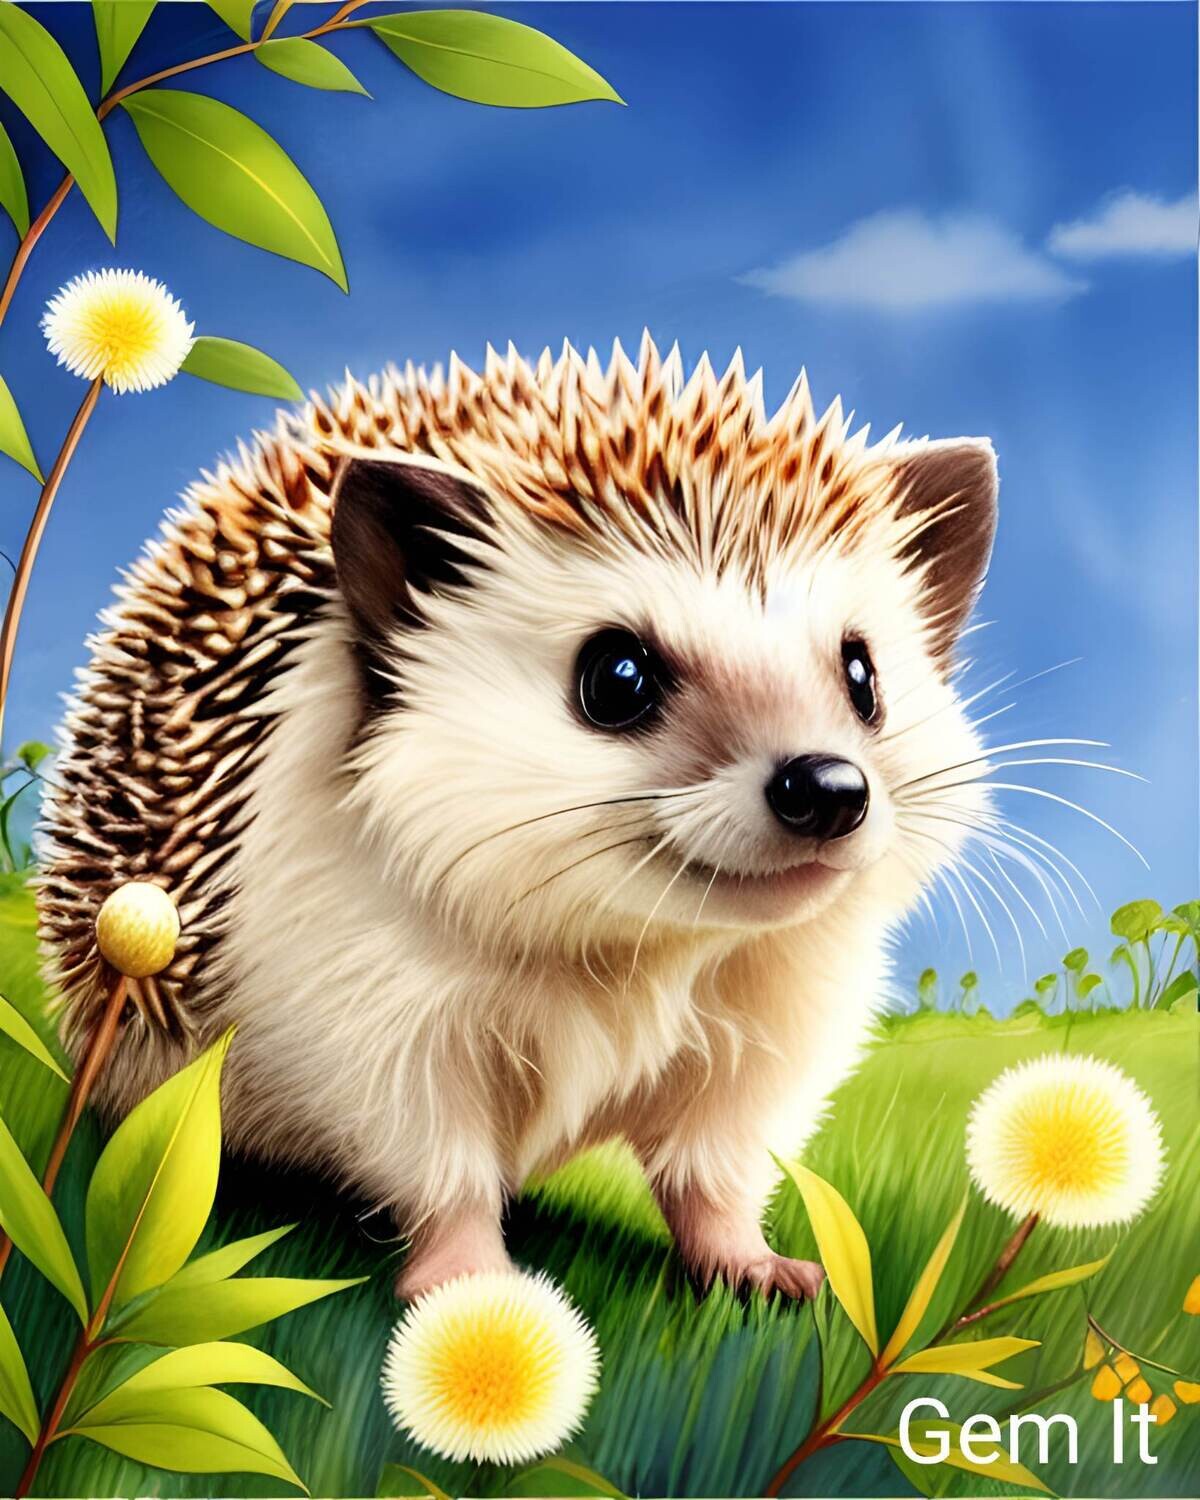 Hedgehog - Specially ordered for you. Delivery is approximately 4 - 6 weeks.